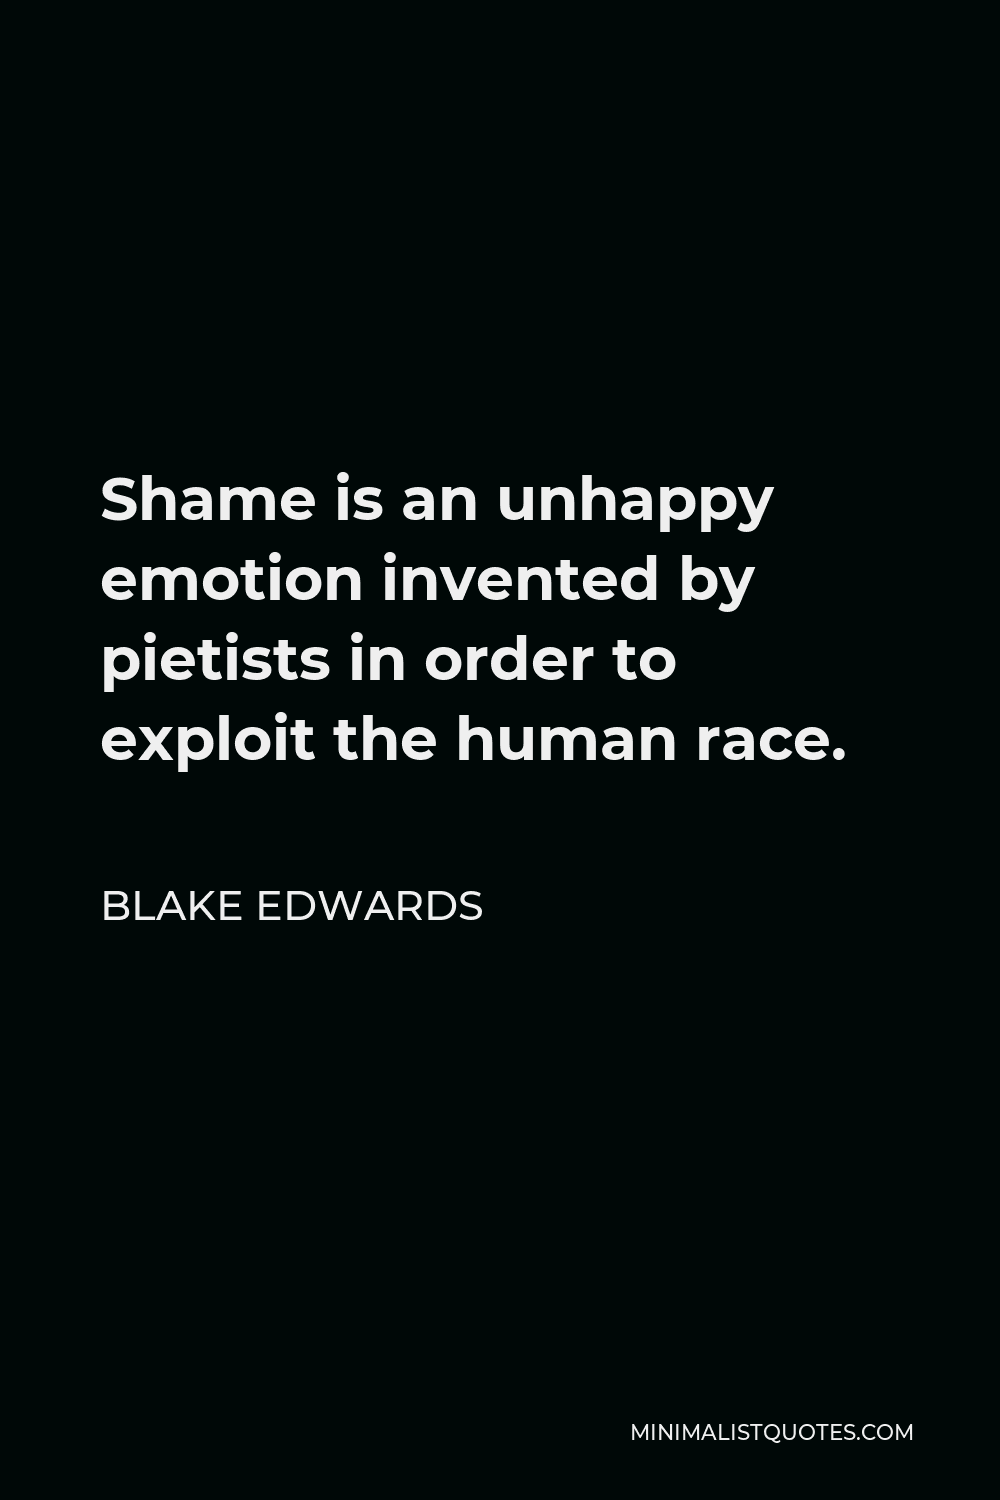 Blake Edwards Quote - Shame is an unhappy emotion invented by pietists in order to exploit the human race.